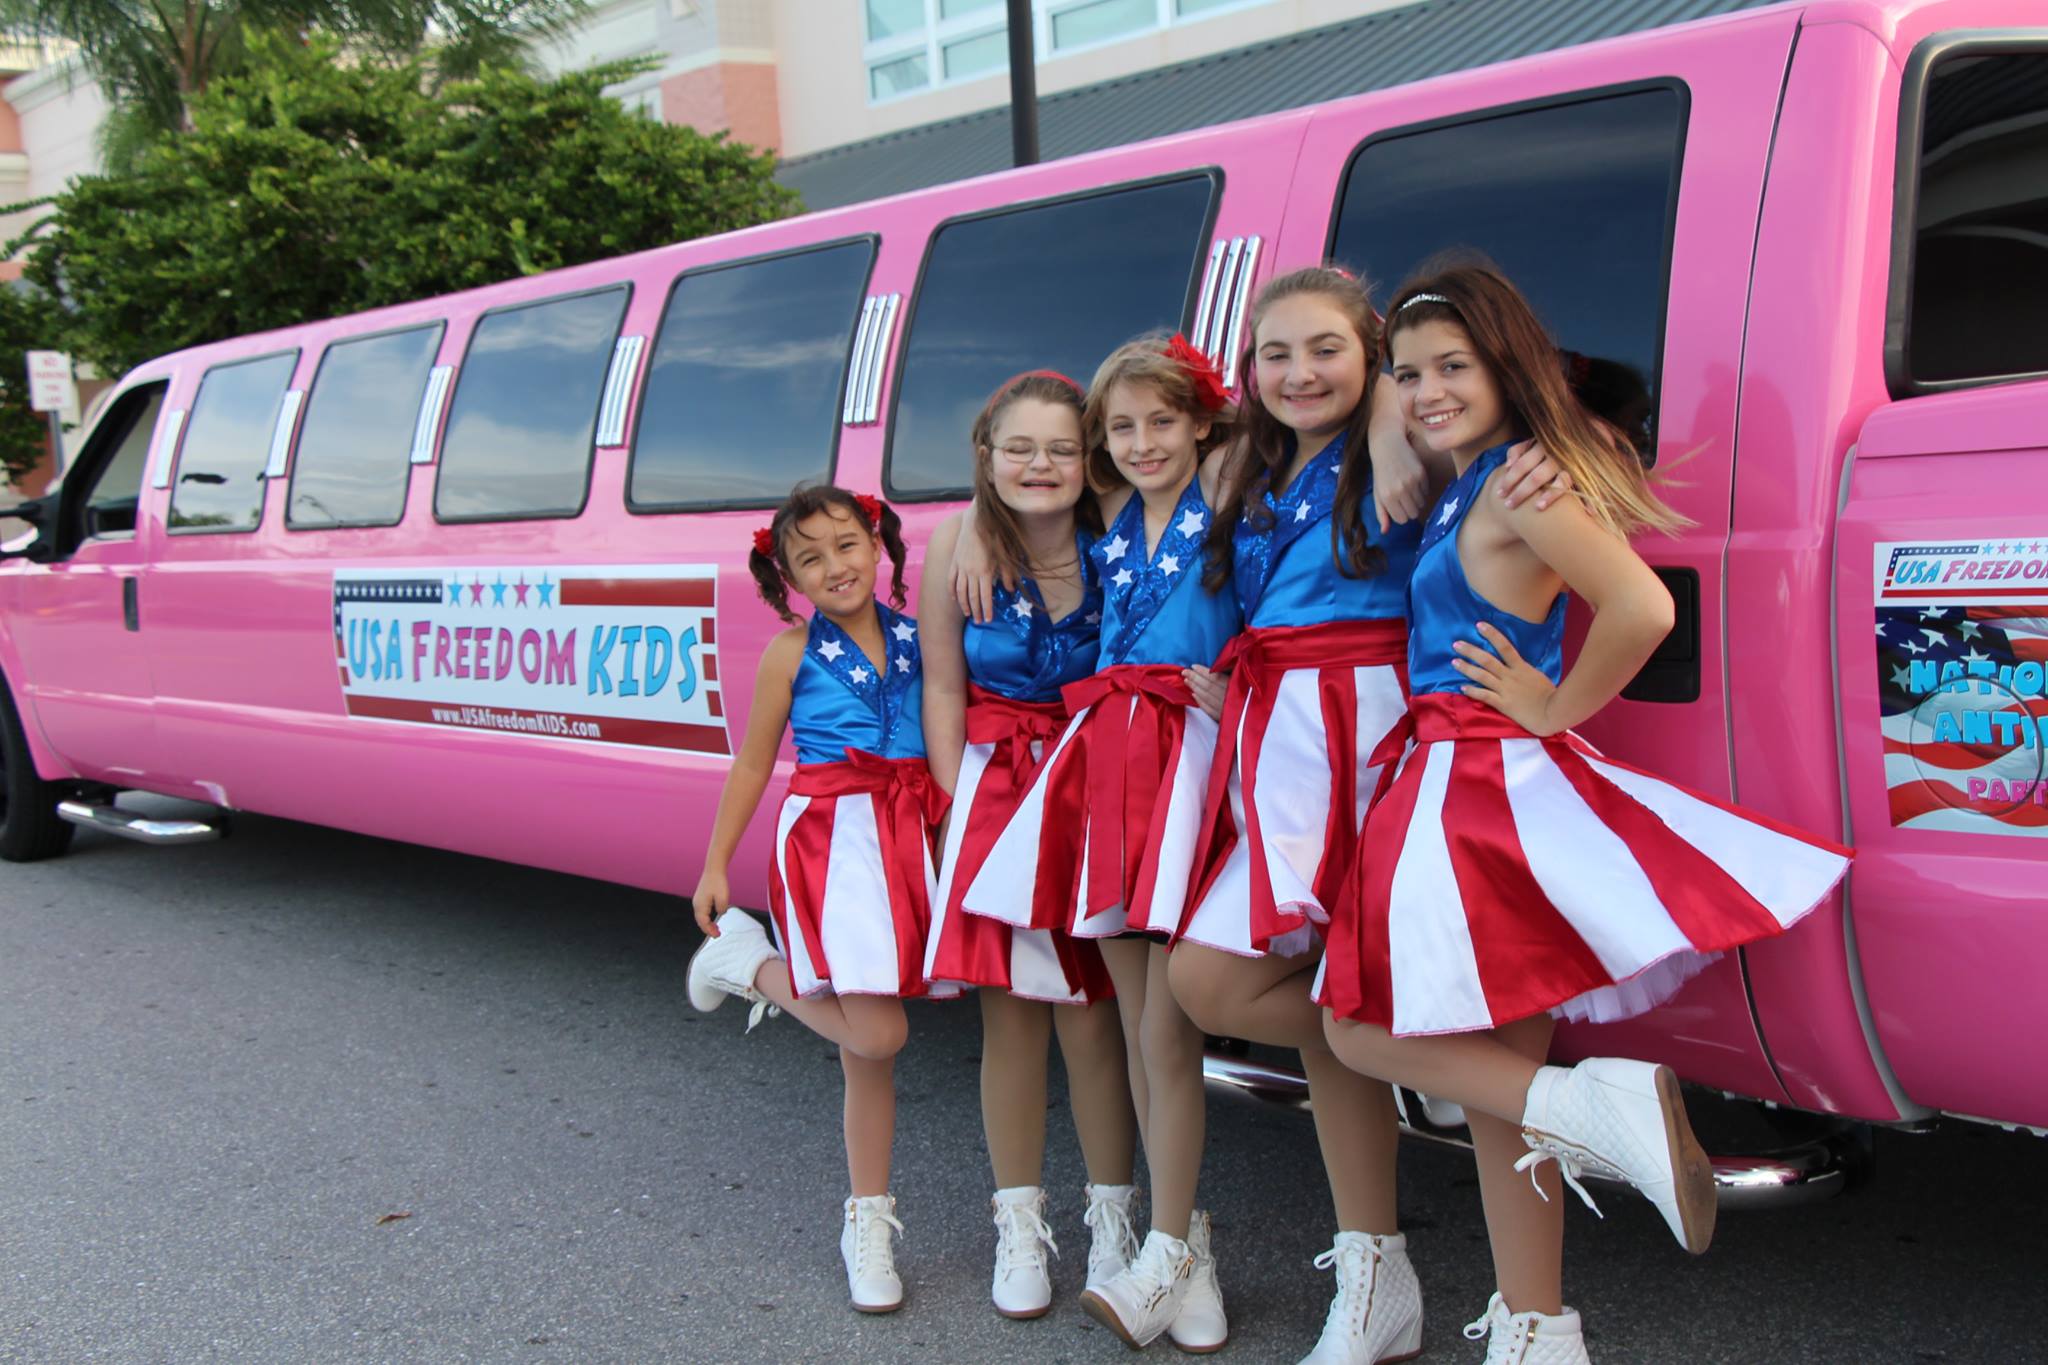 The "USA Freedom Kids" is a girl group based in Florida. They performed for Donald Trump at the Republican presidential frontrunner's rally on Jan. 13. (Courtesy Jeff Popick)